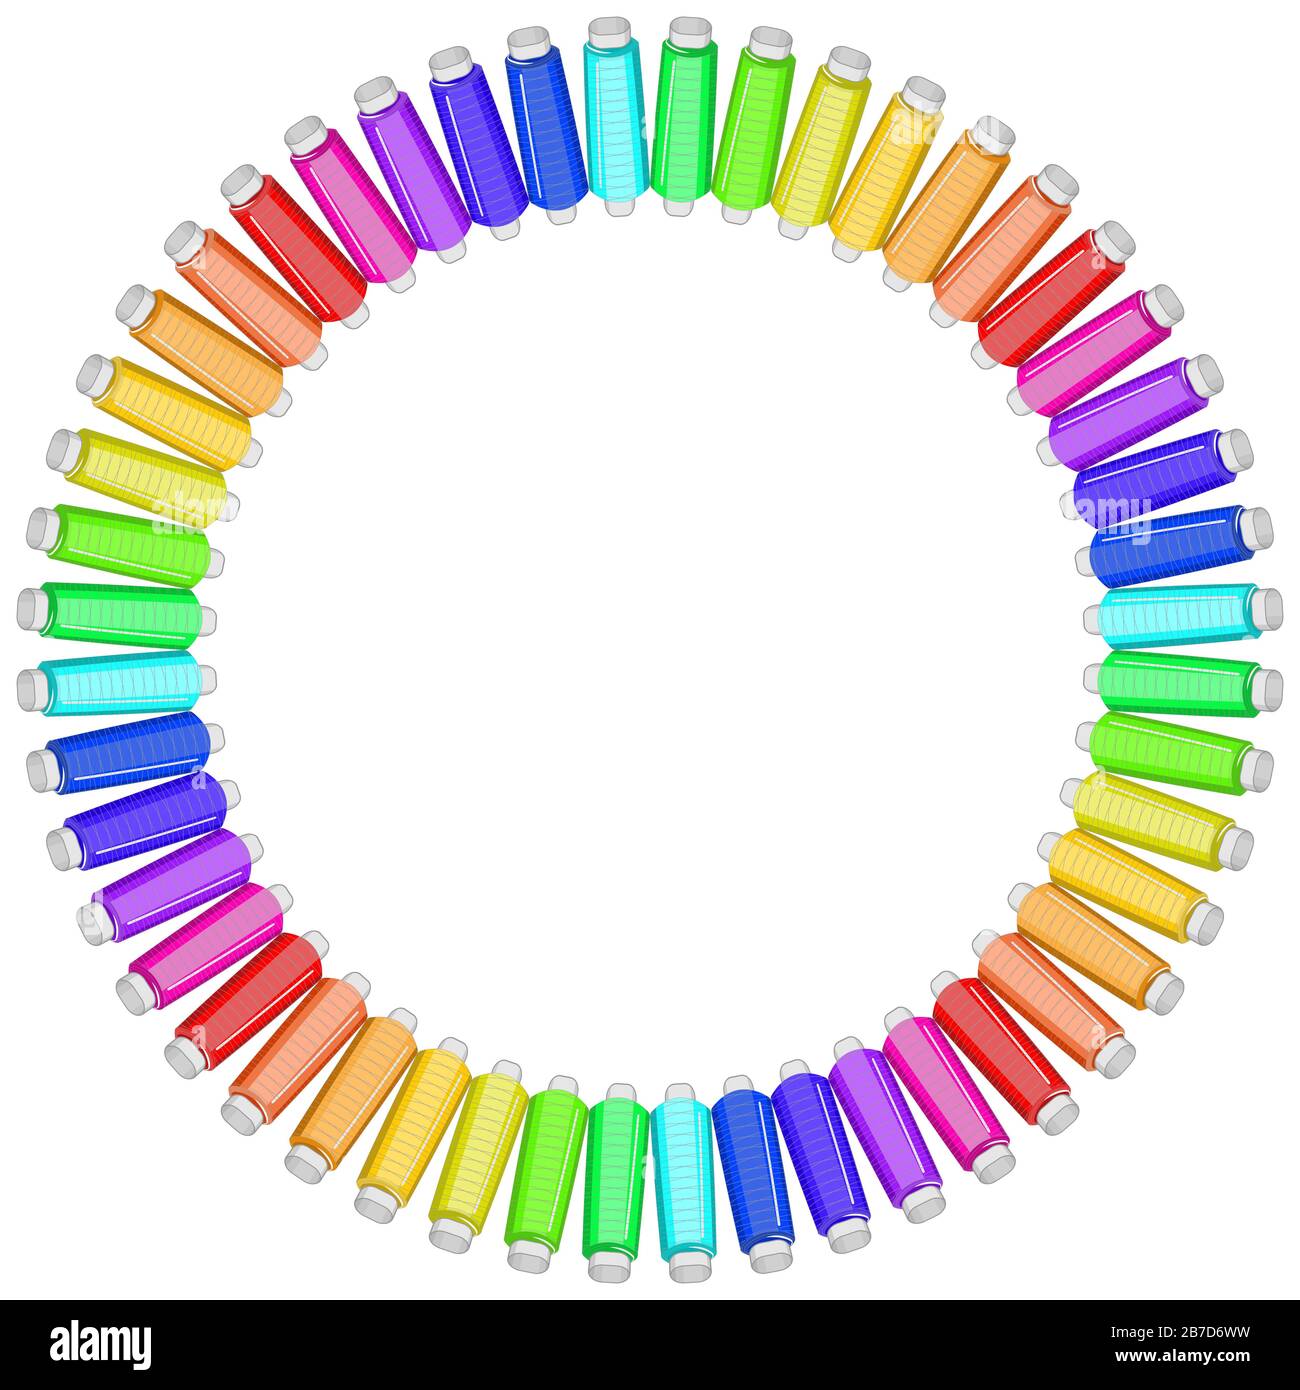 Vector illustration for a needlework project - set of colored threads in the form of a round frame. Isolate on a white square background. Stock Vector